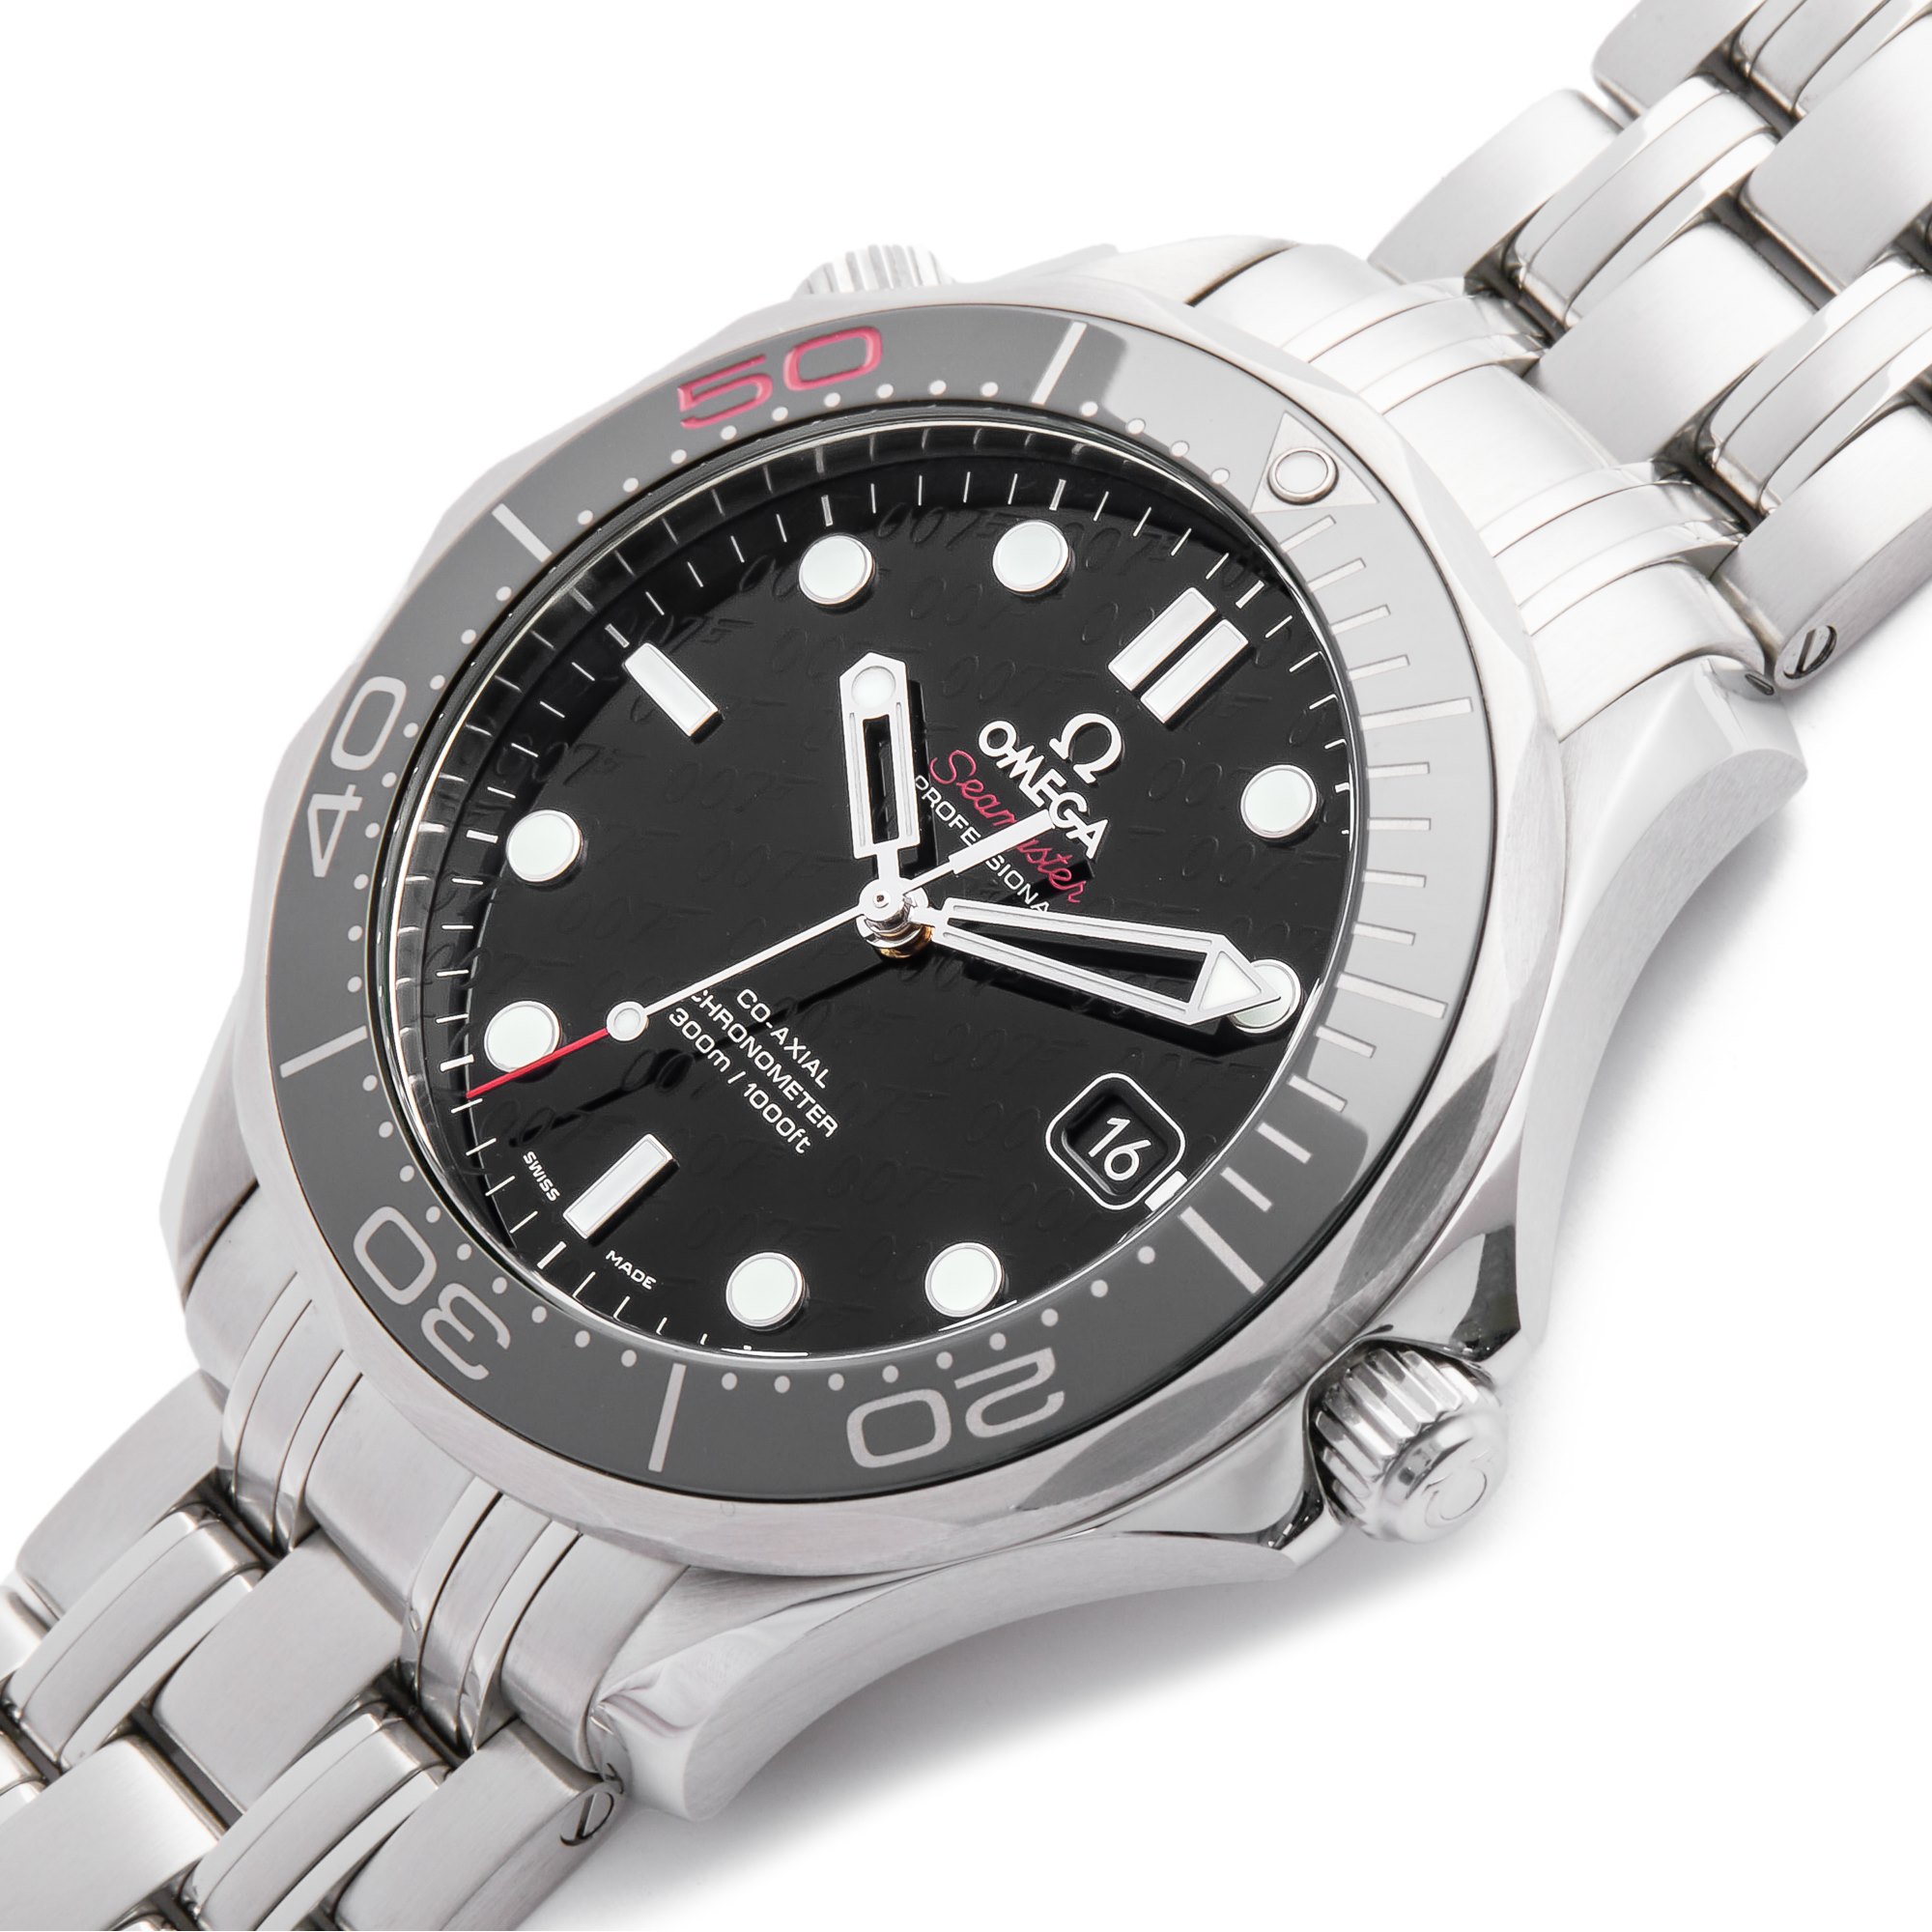 Omega Seamaster 300m James Bond Limited Edition to 11007 Pieces Stainless Steel 212.30.41.20.01.005